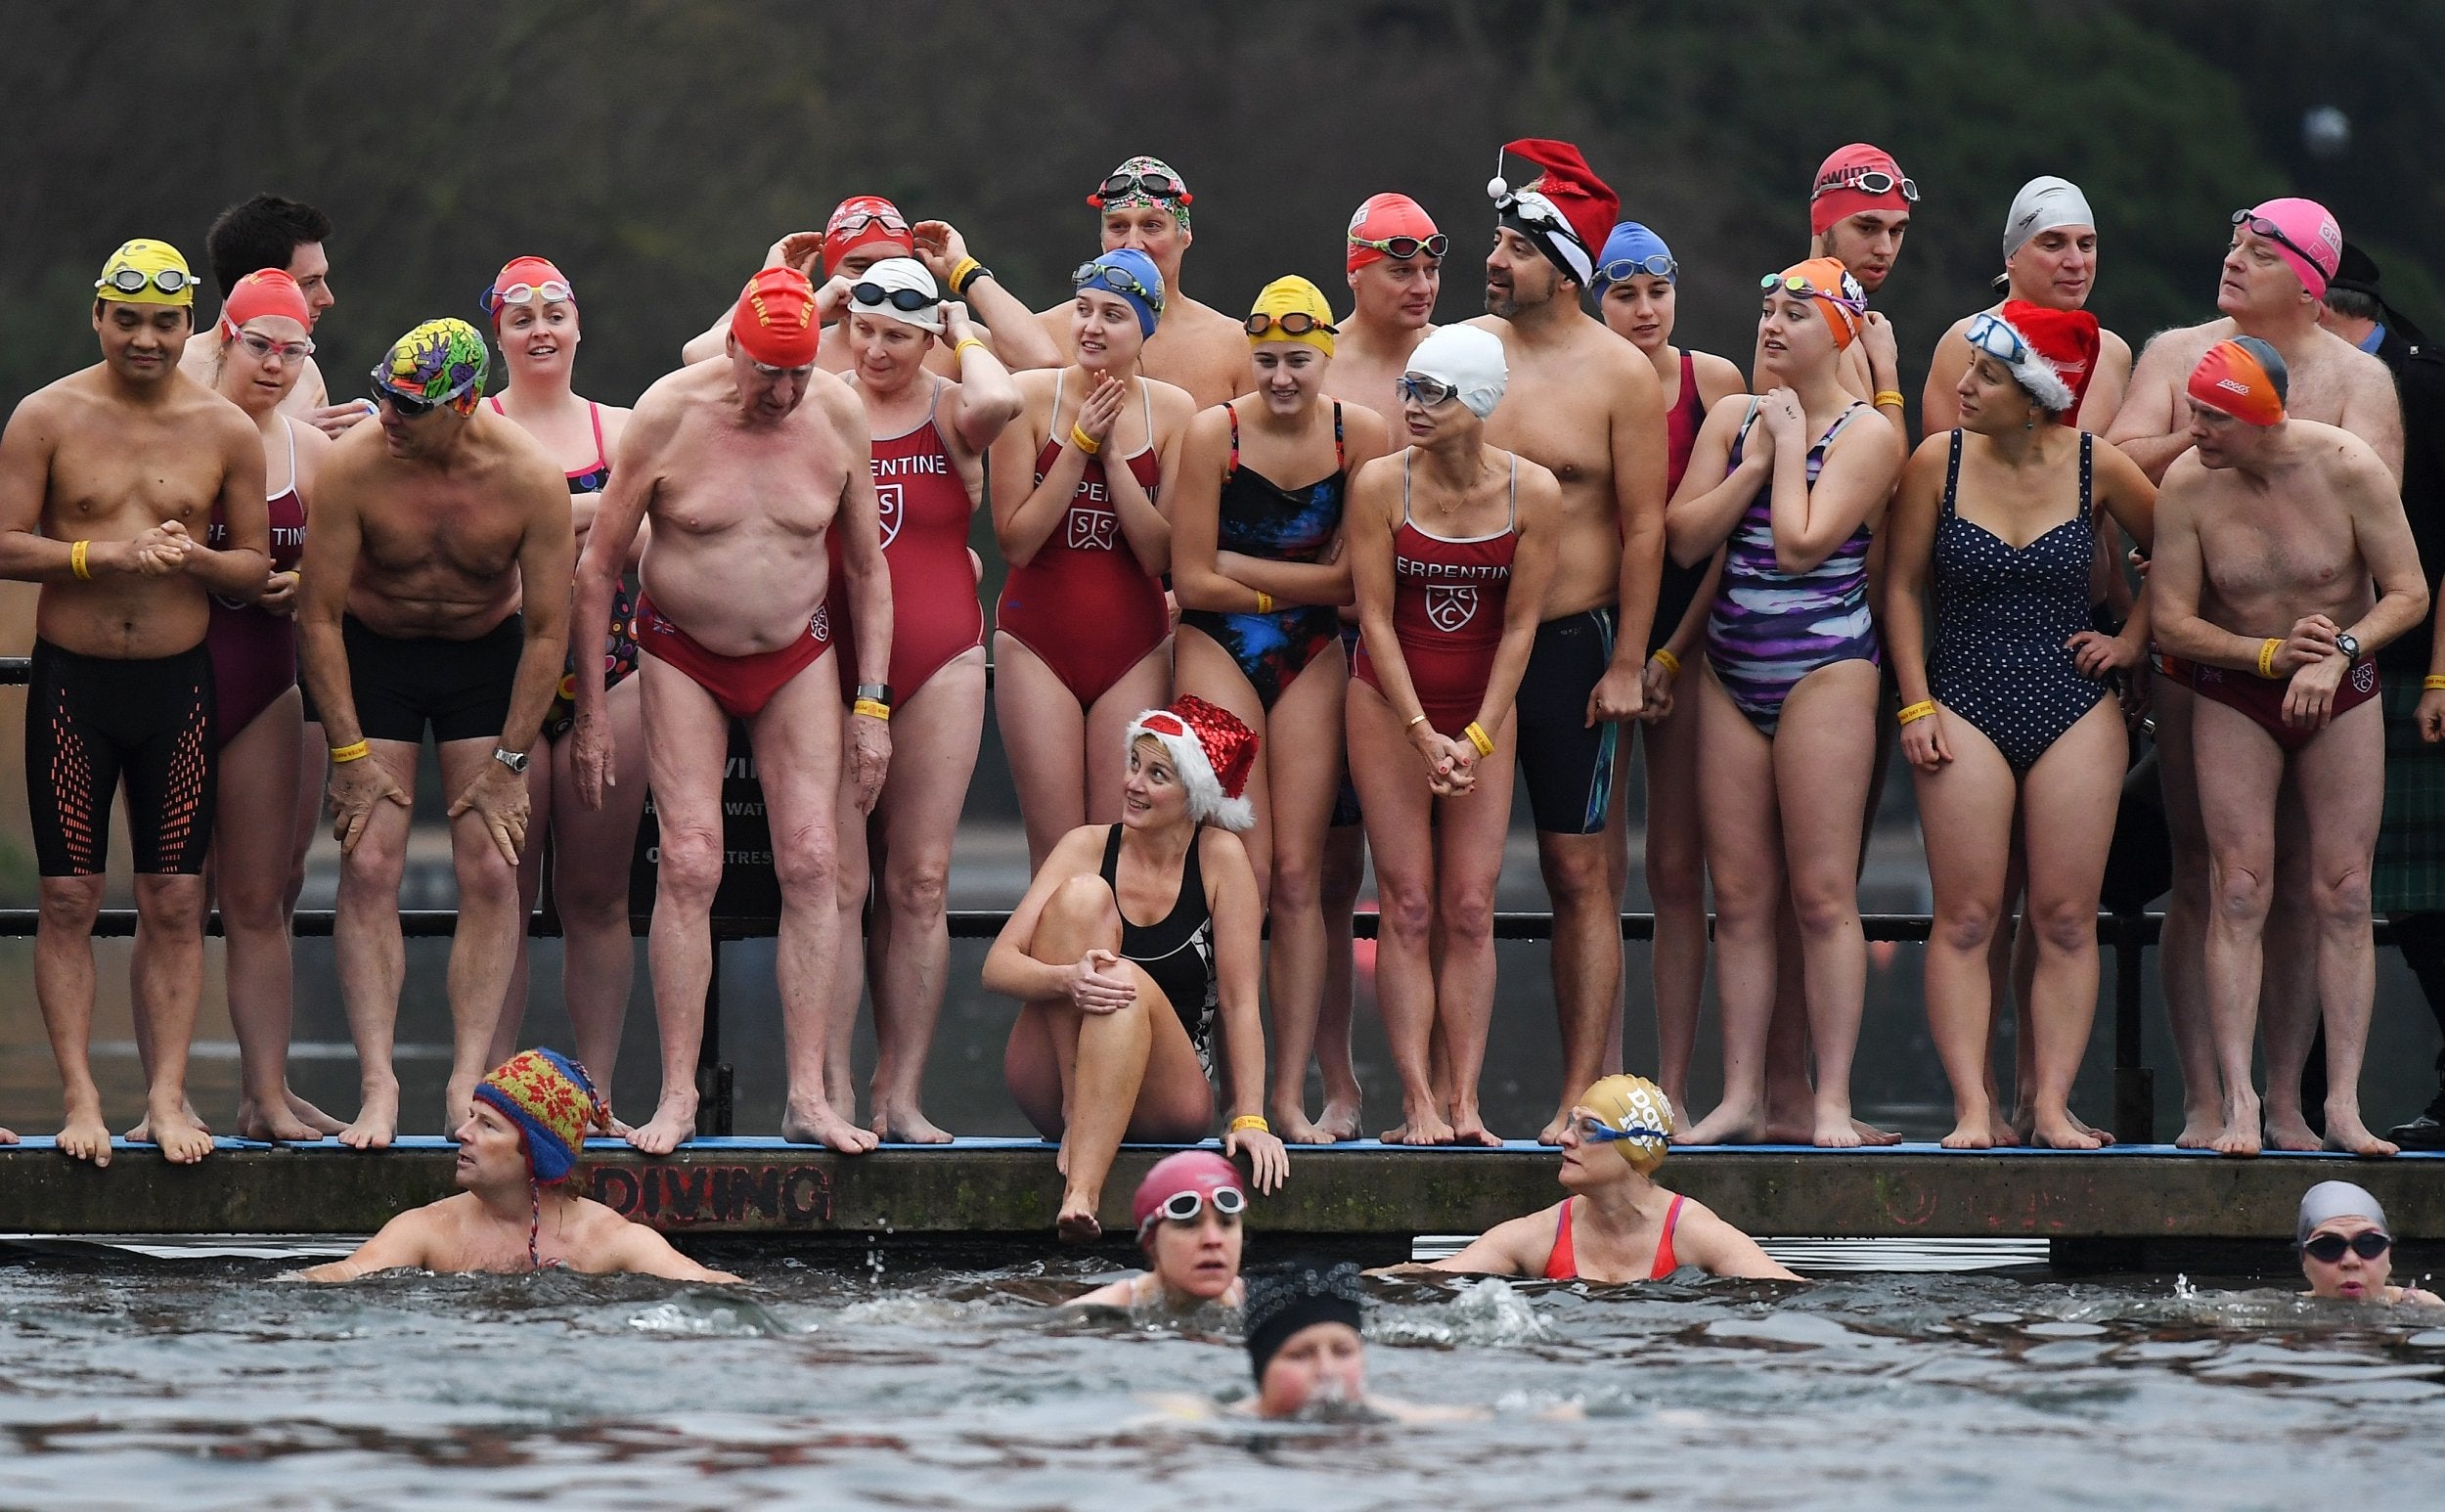 Participants line up for the annual Hyde Park Christmas Day Swim at Hyde Park in London. Traditionally known as the Peter Pan Cup, members of the Hyde Park swimming club take part each year in the frosty waters of the Serpentine Lake.